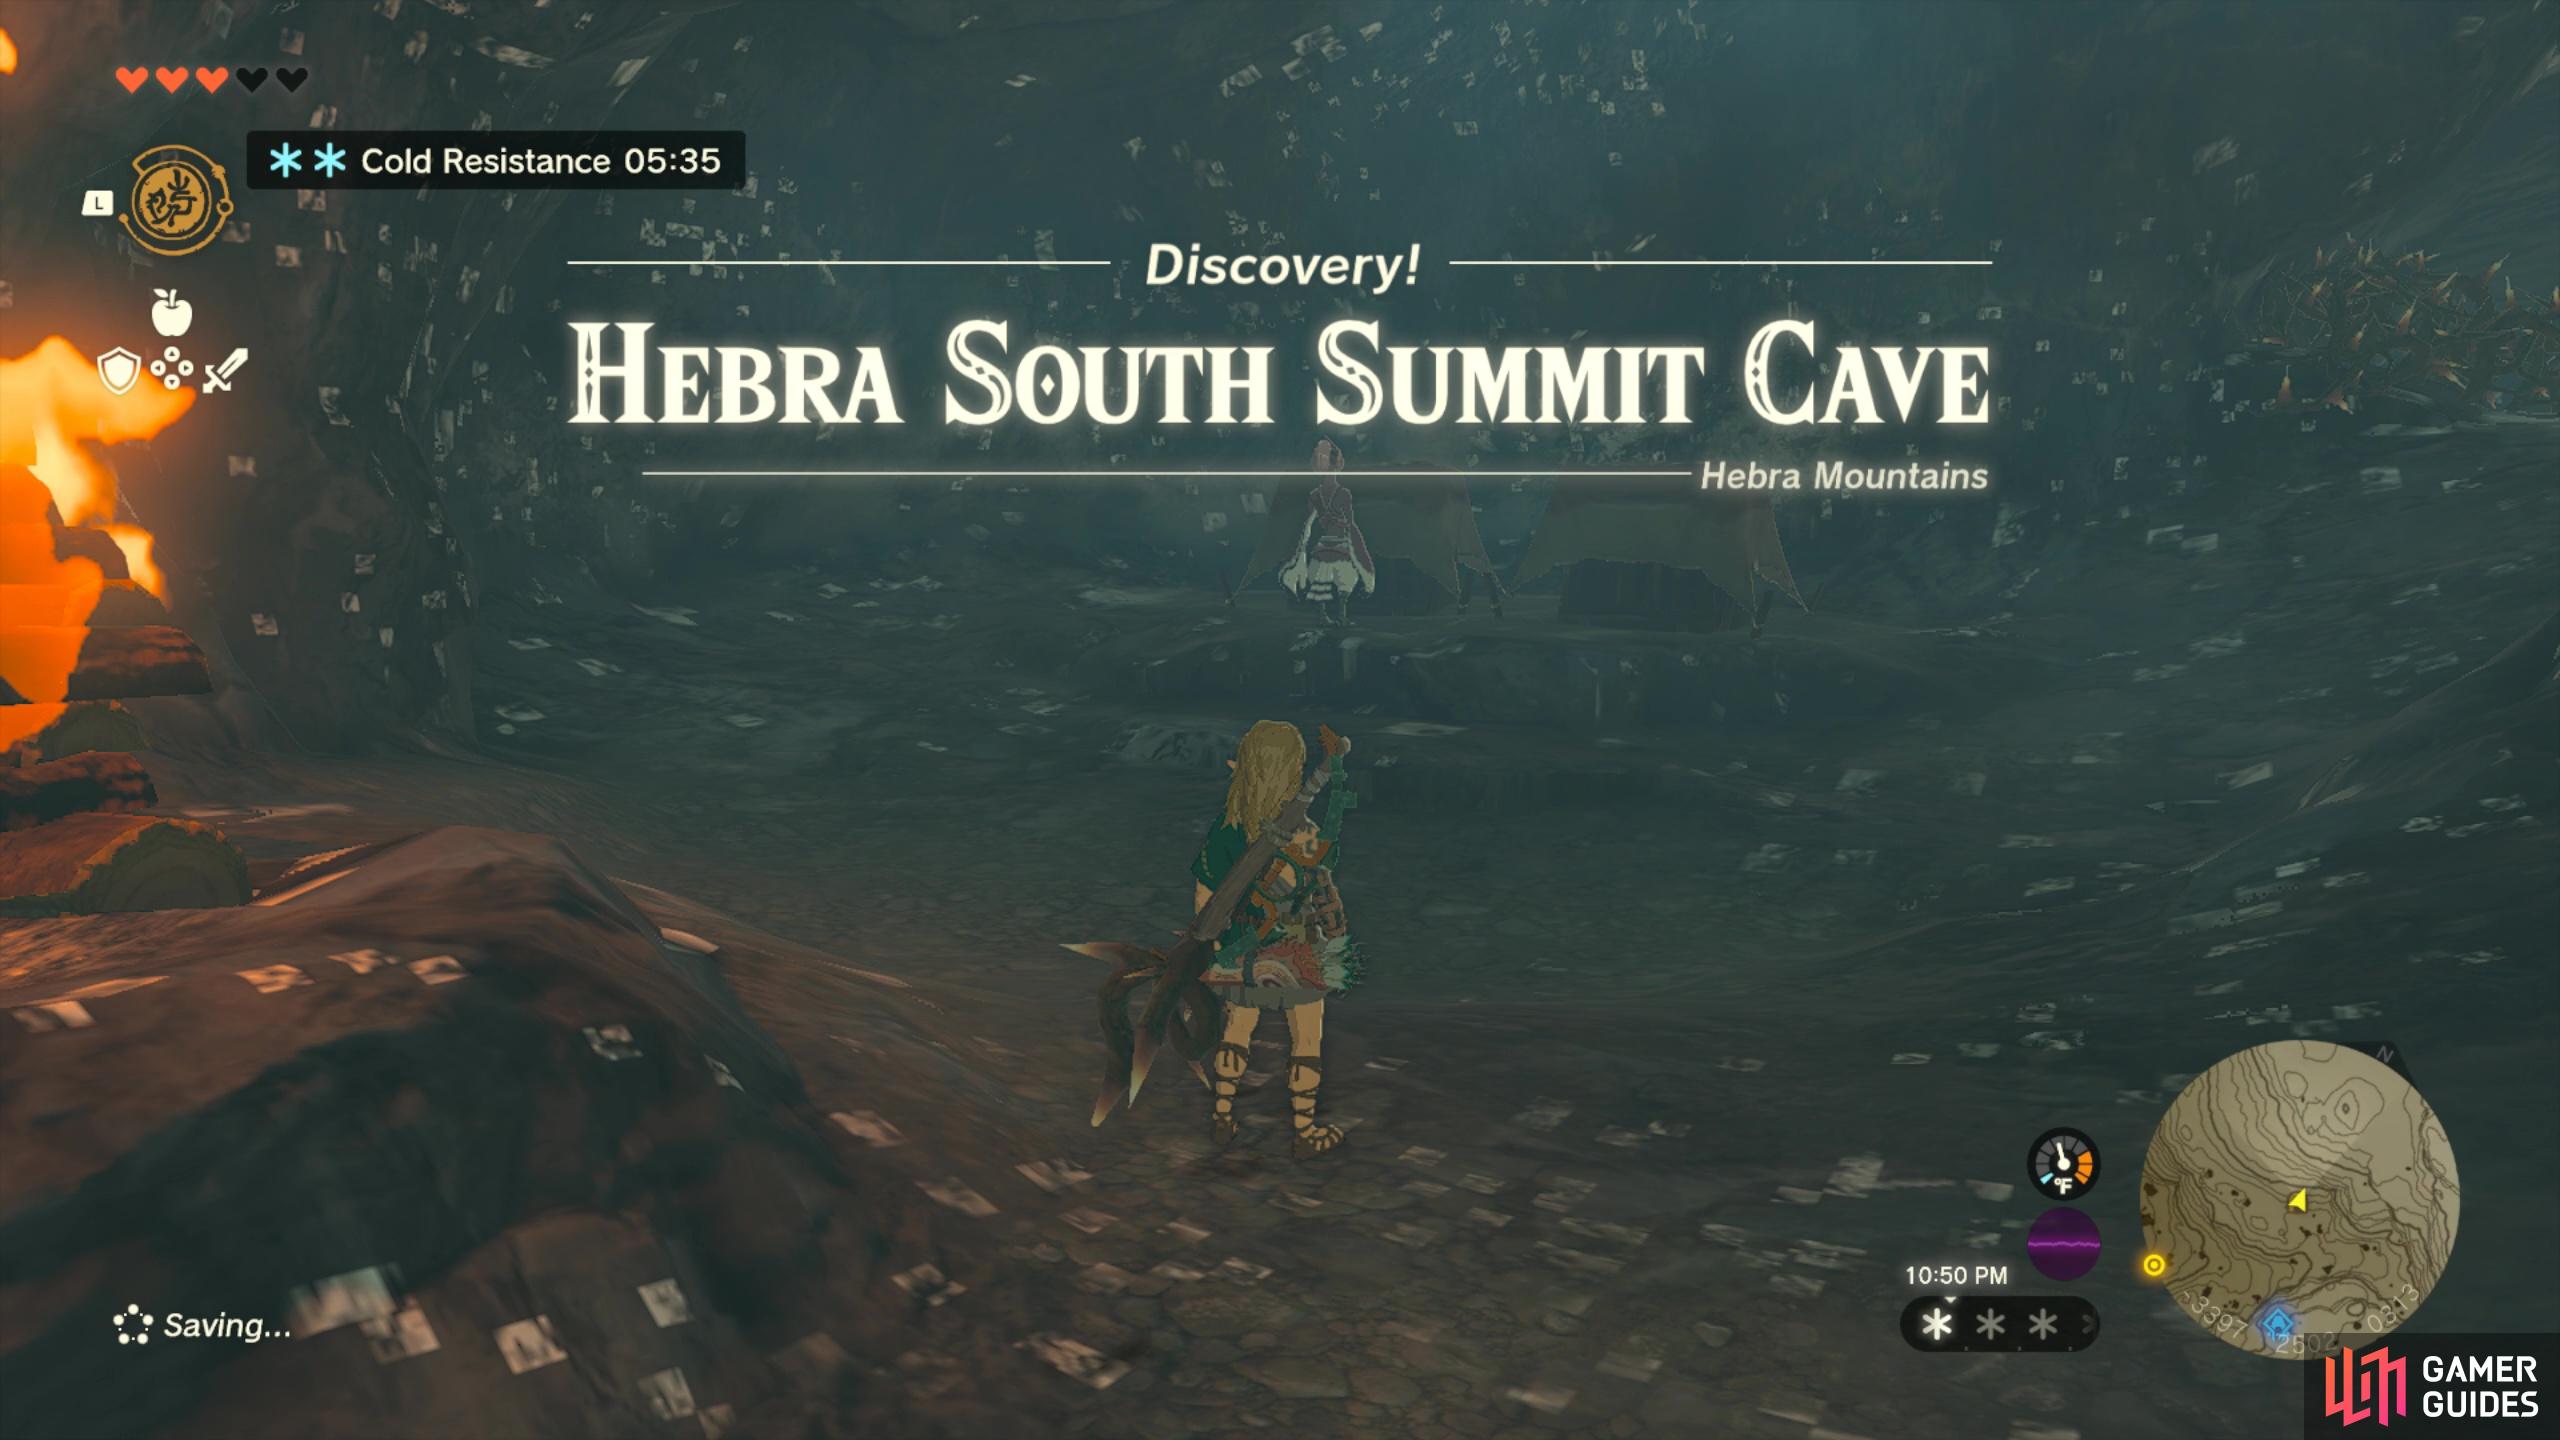 This is Hebra South Summit Cave!